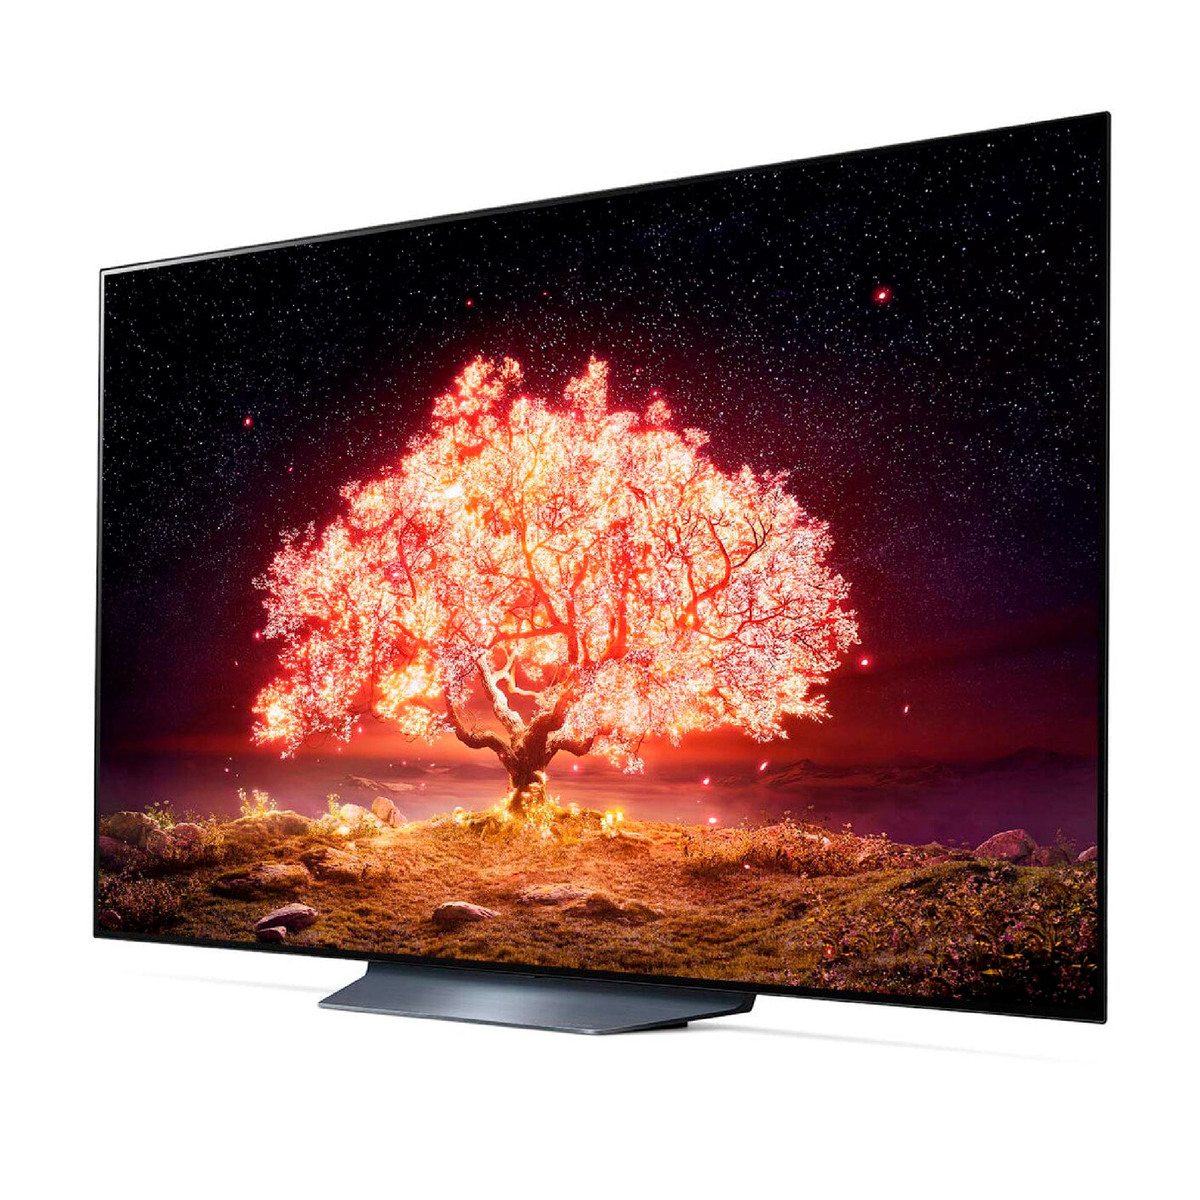 LG OLED 4K Smart TV 77 Inch B1 Series Cinema Screen, New 2021 Design 4K Cinema HDR webOS Smart with ThinQ AI Pixel Dimming